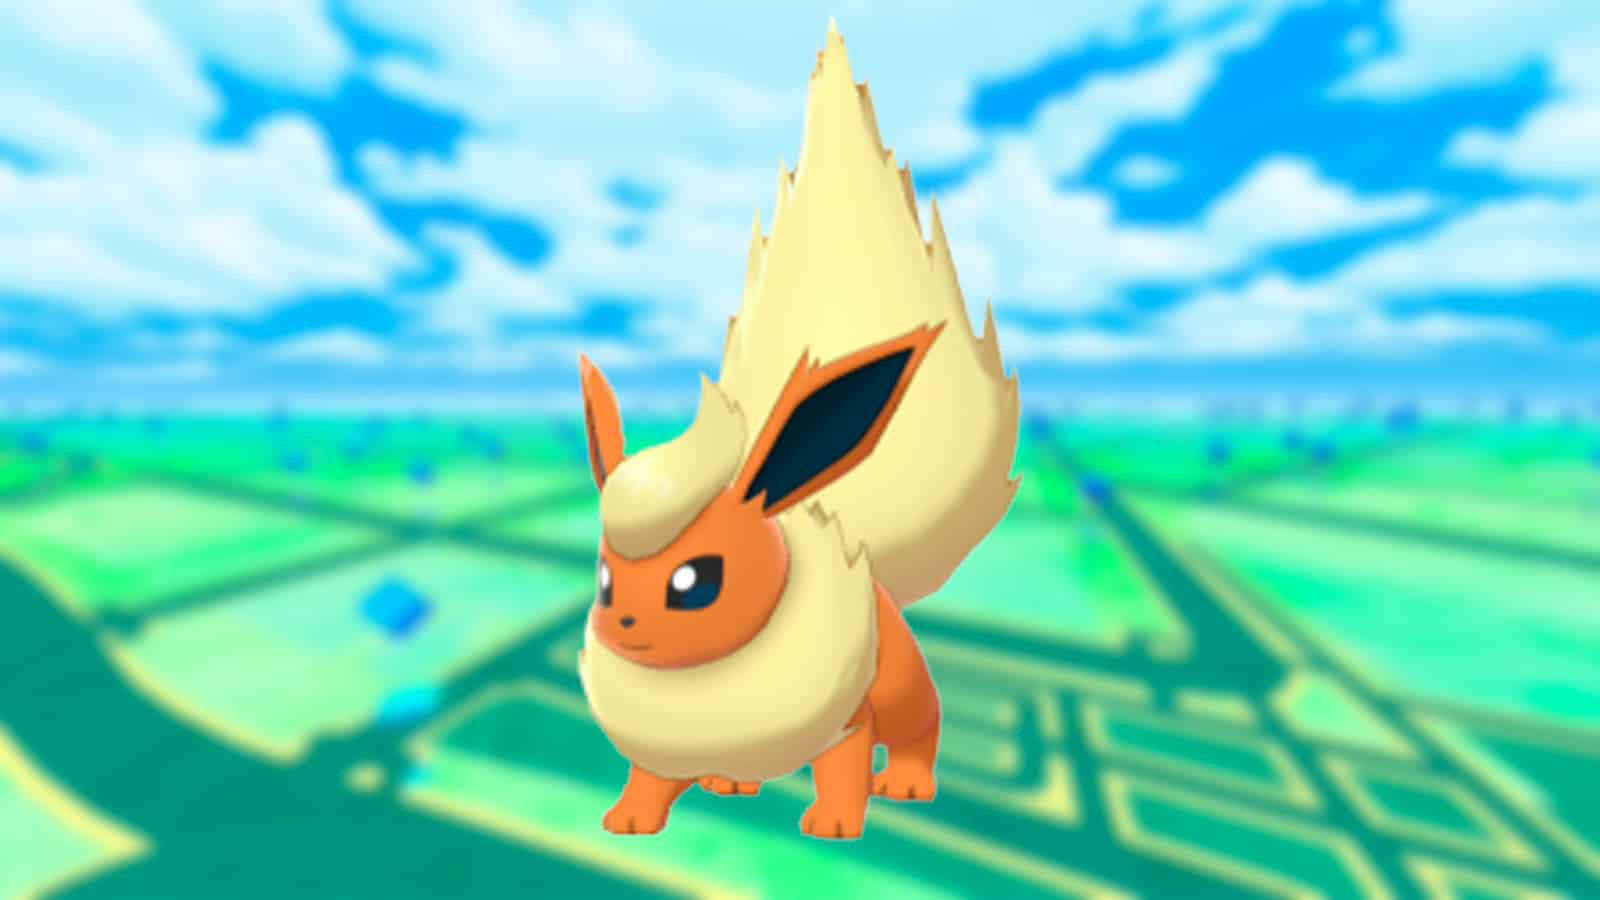 An image of Flareon from Pokemon Go